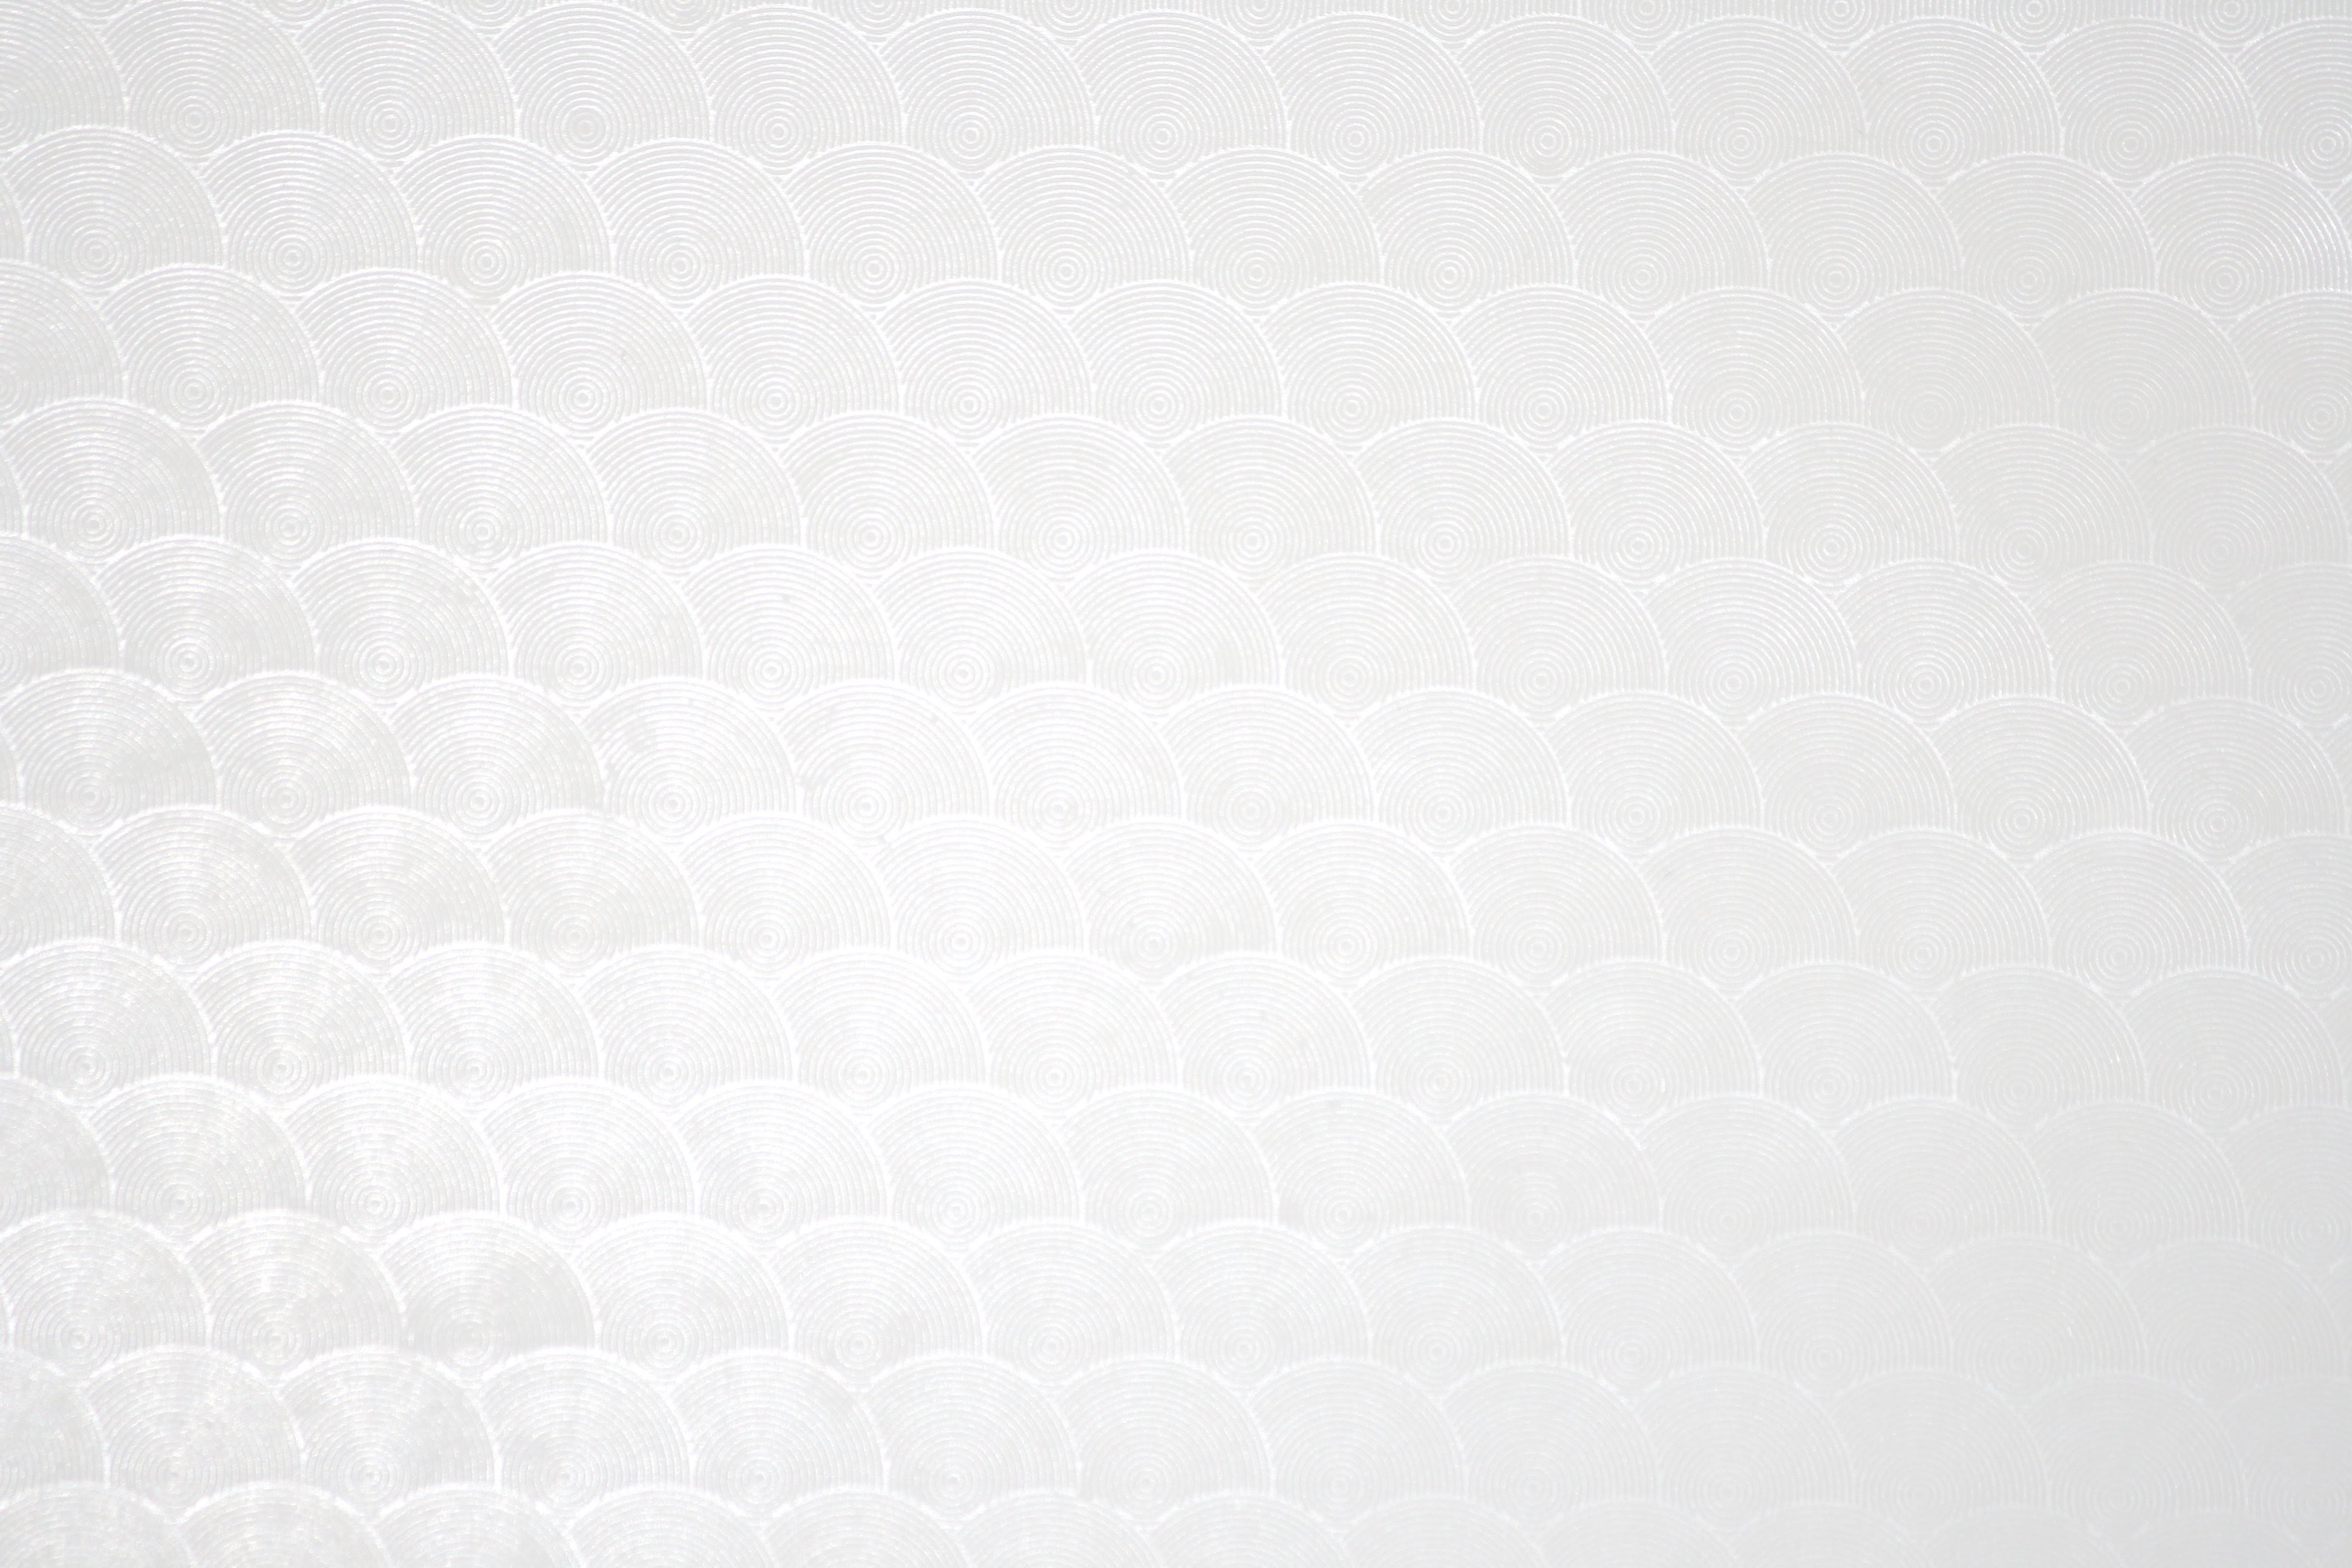 White Circle Patterned Plastic Texture Picture | Free ...